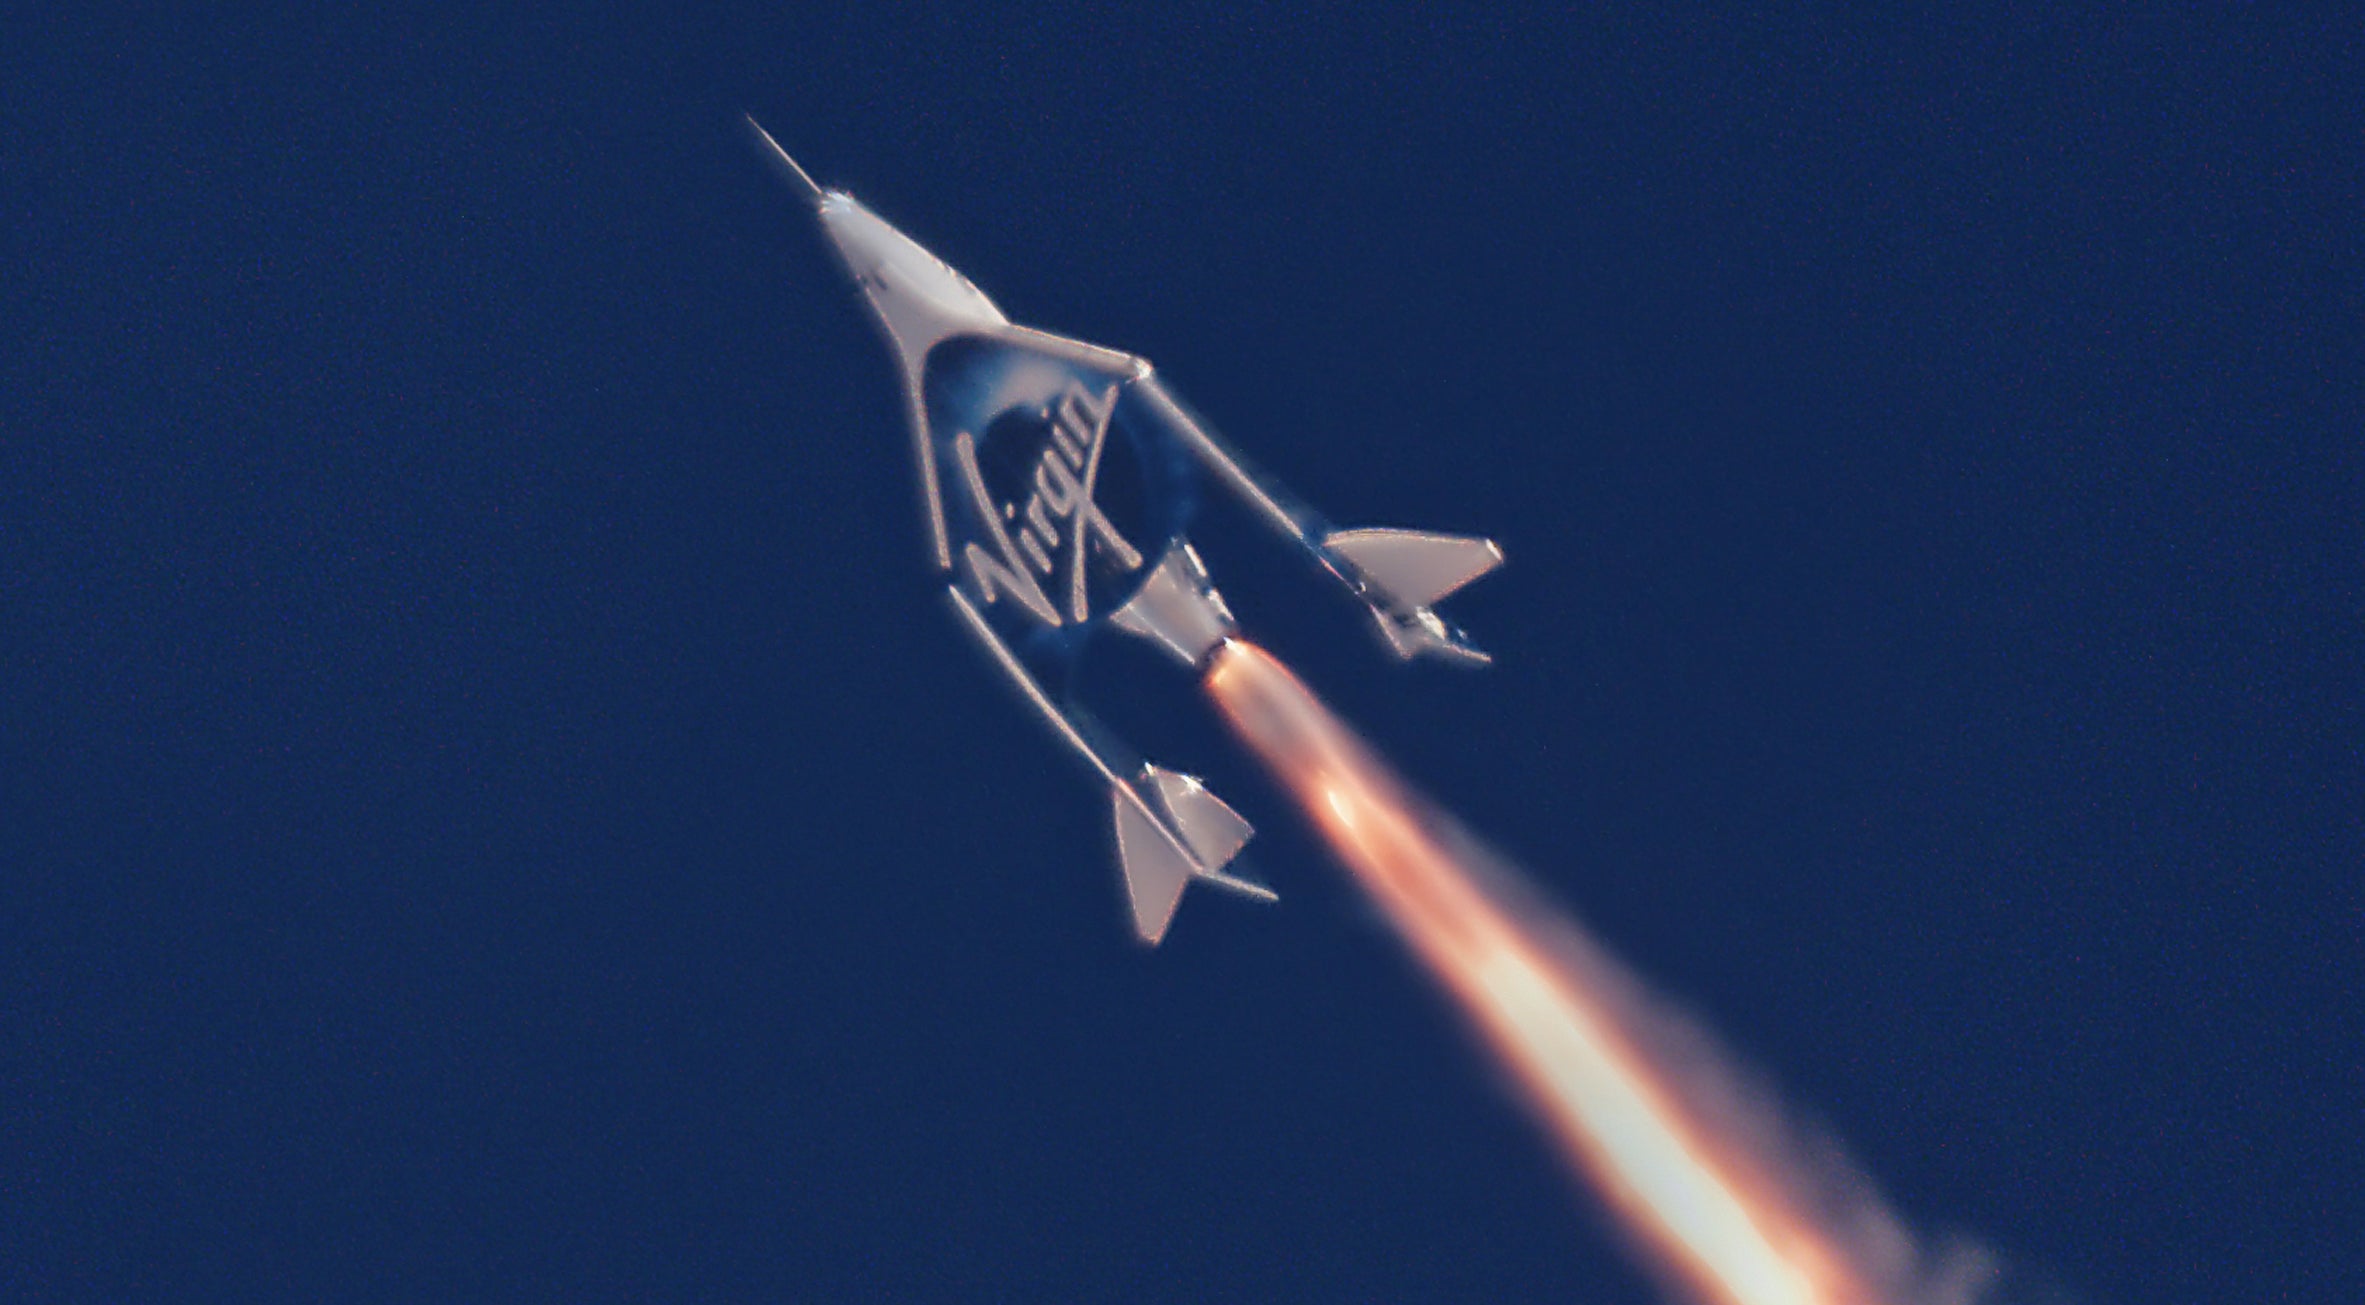 VSS Unity goes supersonic in her second powered flight